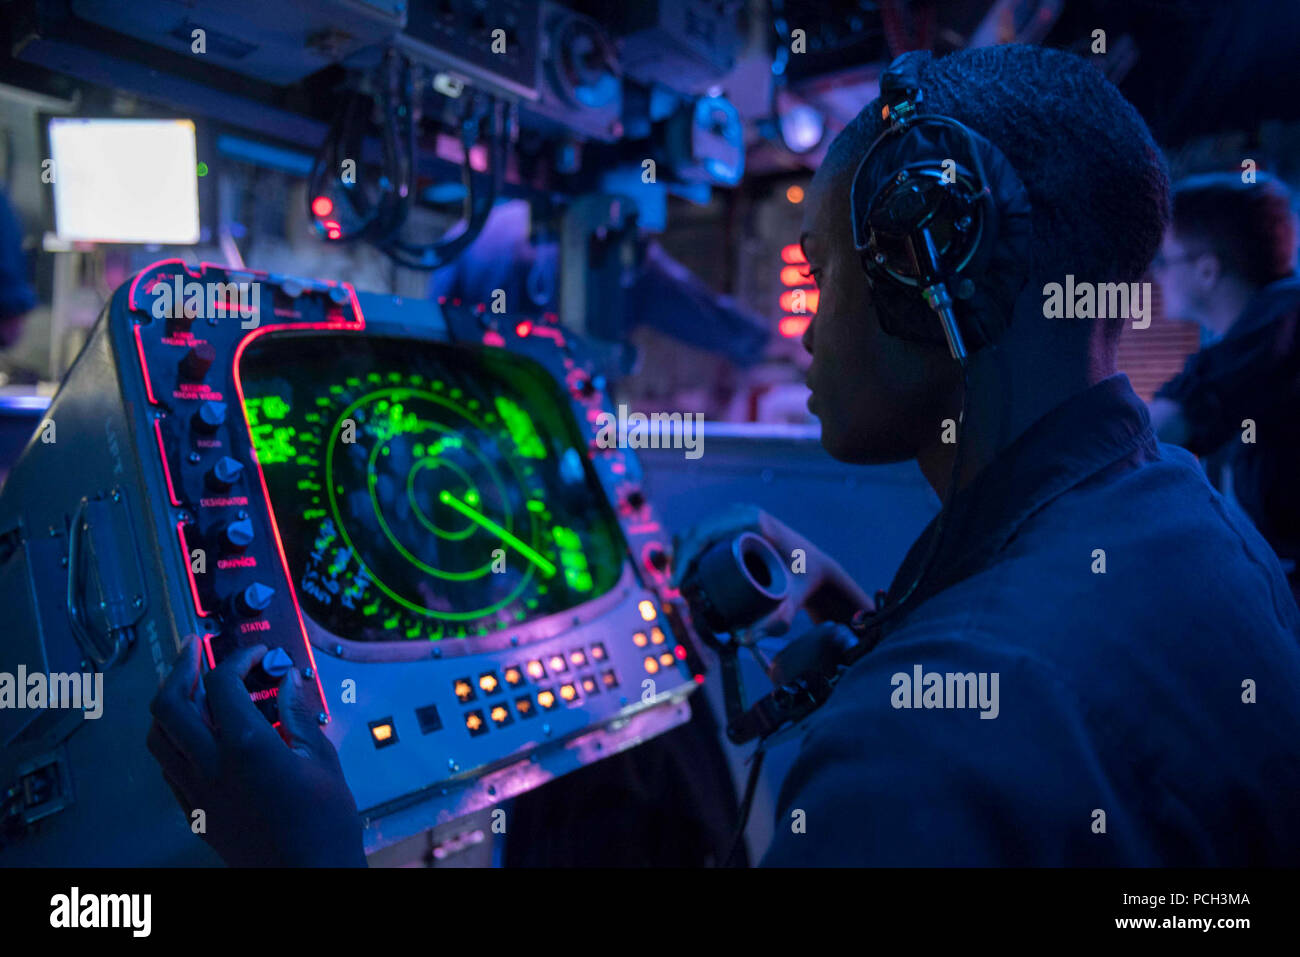 CARIBBEAN SEA (Oct. 16, 2017) Operations Specialist 3rd Class Terrell Clark tracks a landing craft utility transporting Marines from the amphibious assault ship USS Kearsarge to Puerto Rico in Kearsarge's combat information center. Kearsarge is assisting with relief efforts in the aftermath of Hurricane Maria. The Department of Defense is supporting the Federal Emergency Management Agency, the lead federal agency in helping those affected by Hurricane Maria to minimize suffering and is one component of the overall whole-of-government response effort. Stock Photo